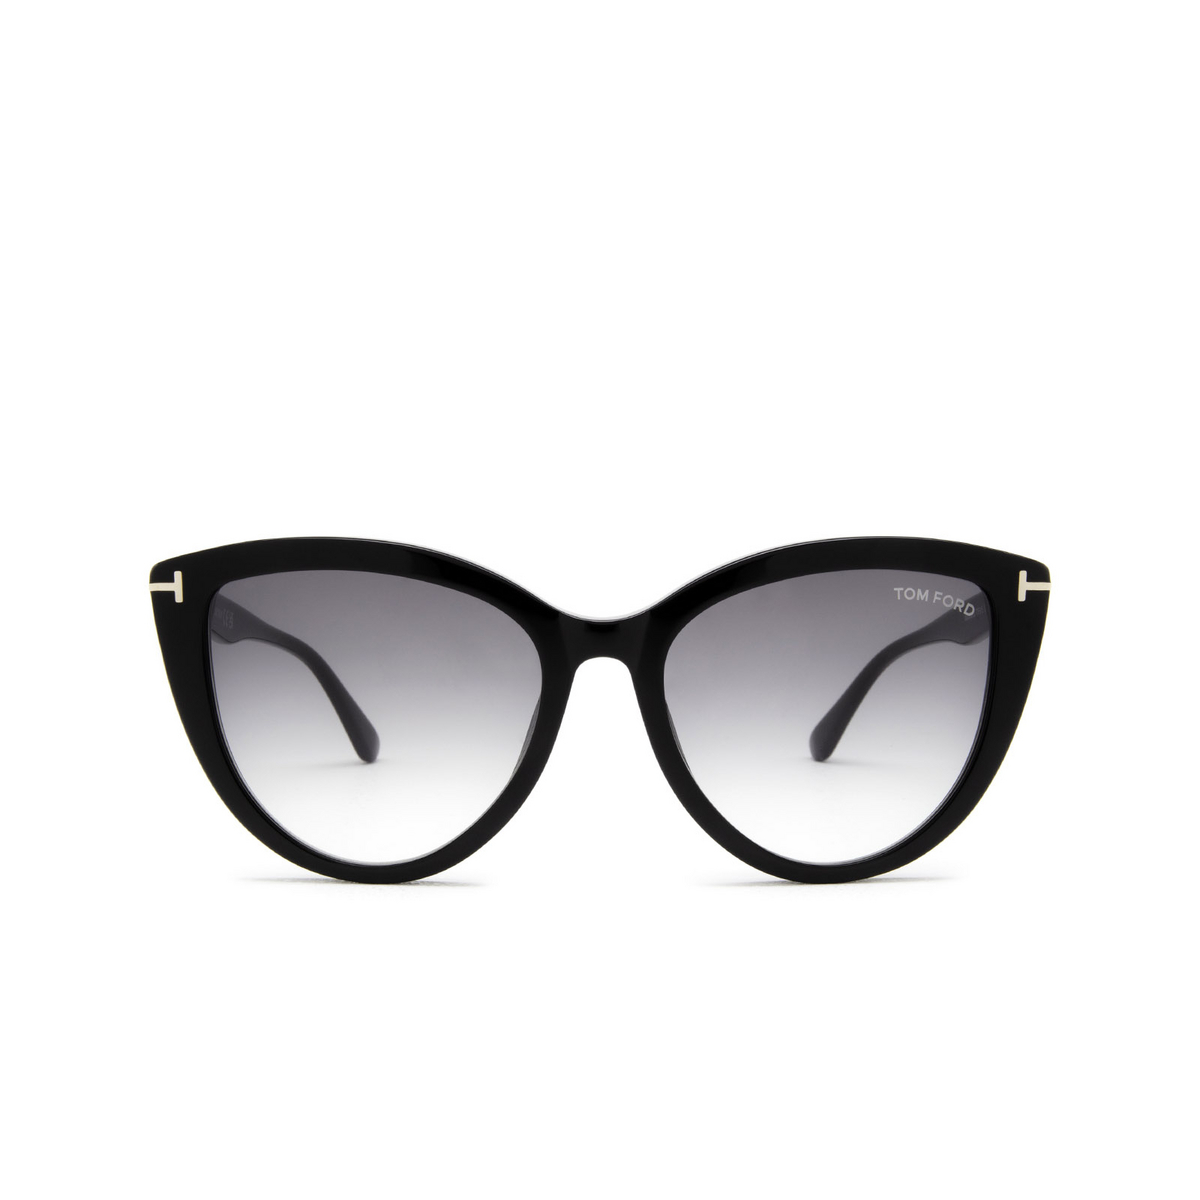 Tom Ford® Cat-eye Sunglasses: Isabella-02 FT0915 color Black 01B - front view.